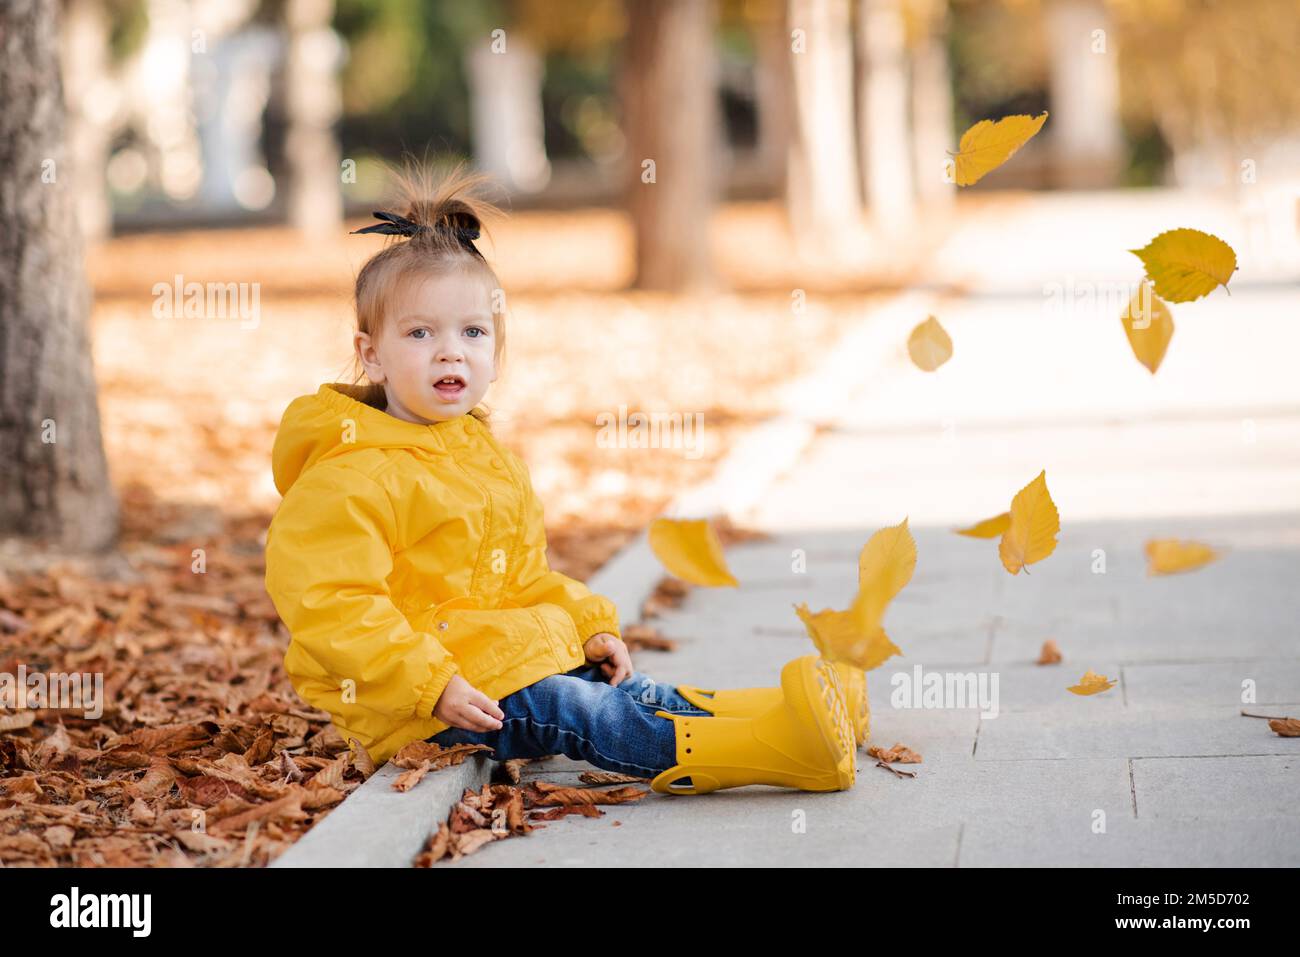 Cute funny kid girl 2-3 year old wear yellow rain jacket and rubber boots in autumn park outdoor over fallen leaves. Fall season. Childhood. Stock Photo